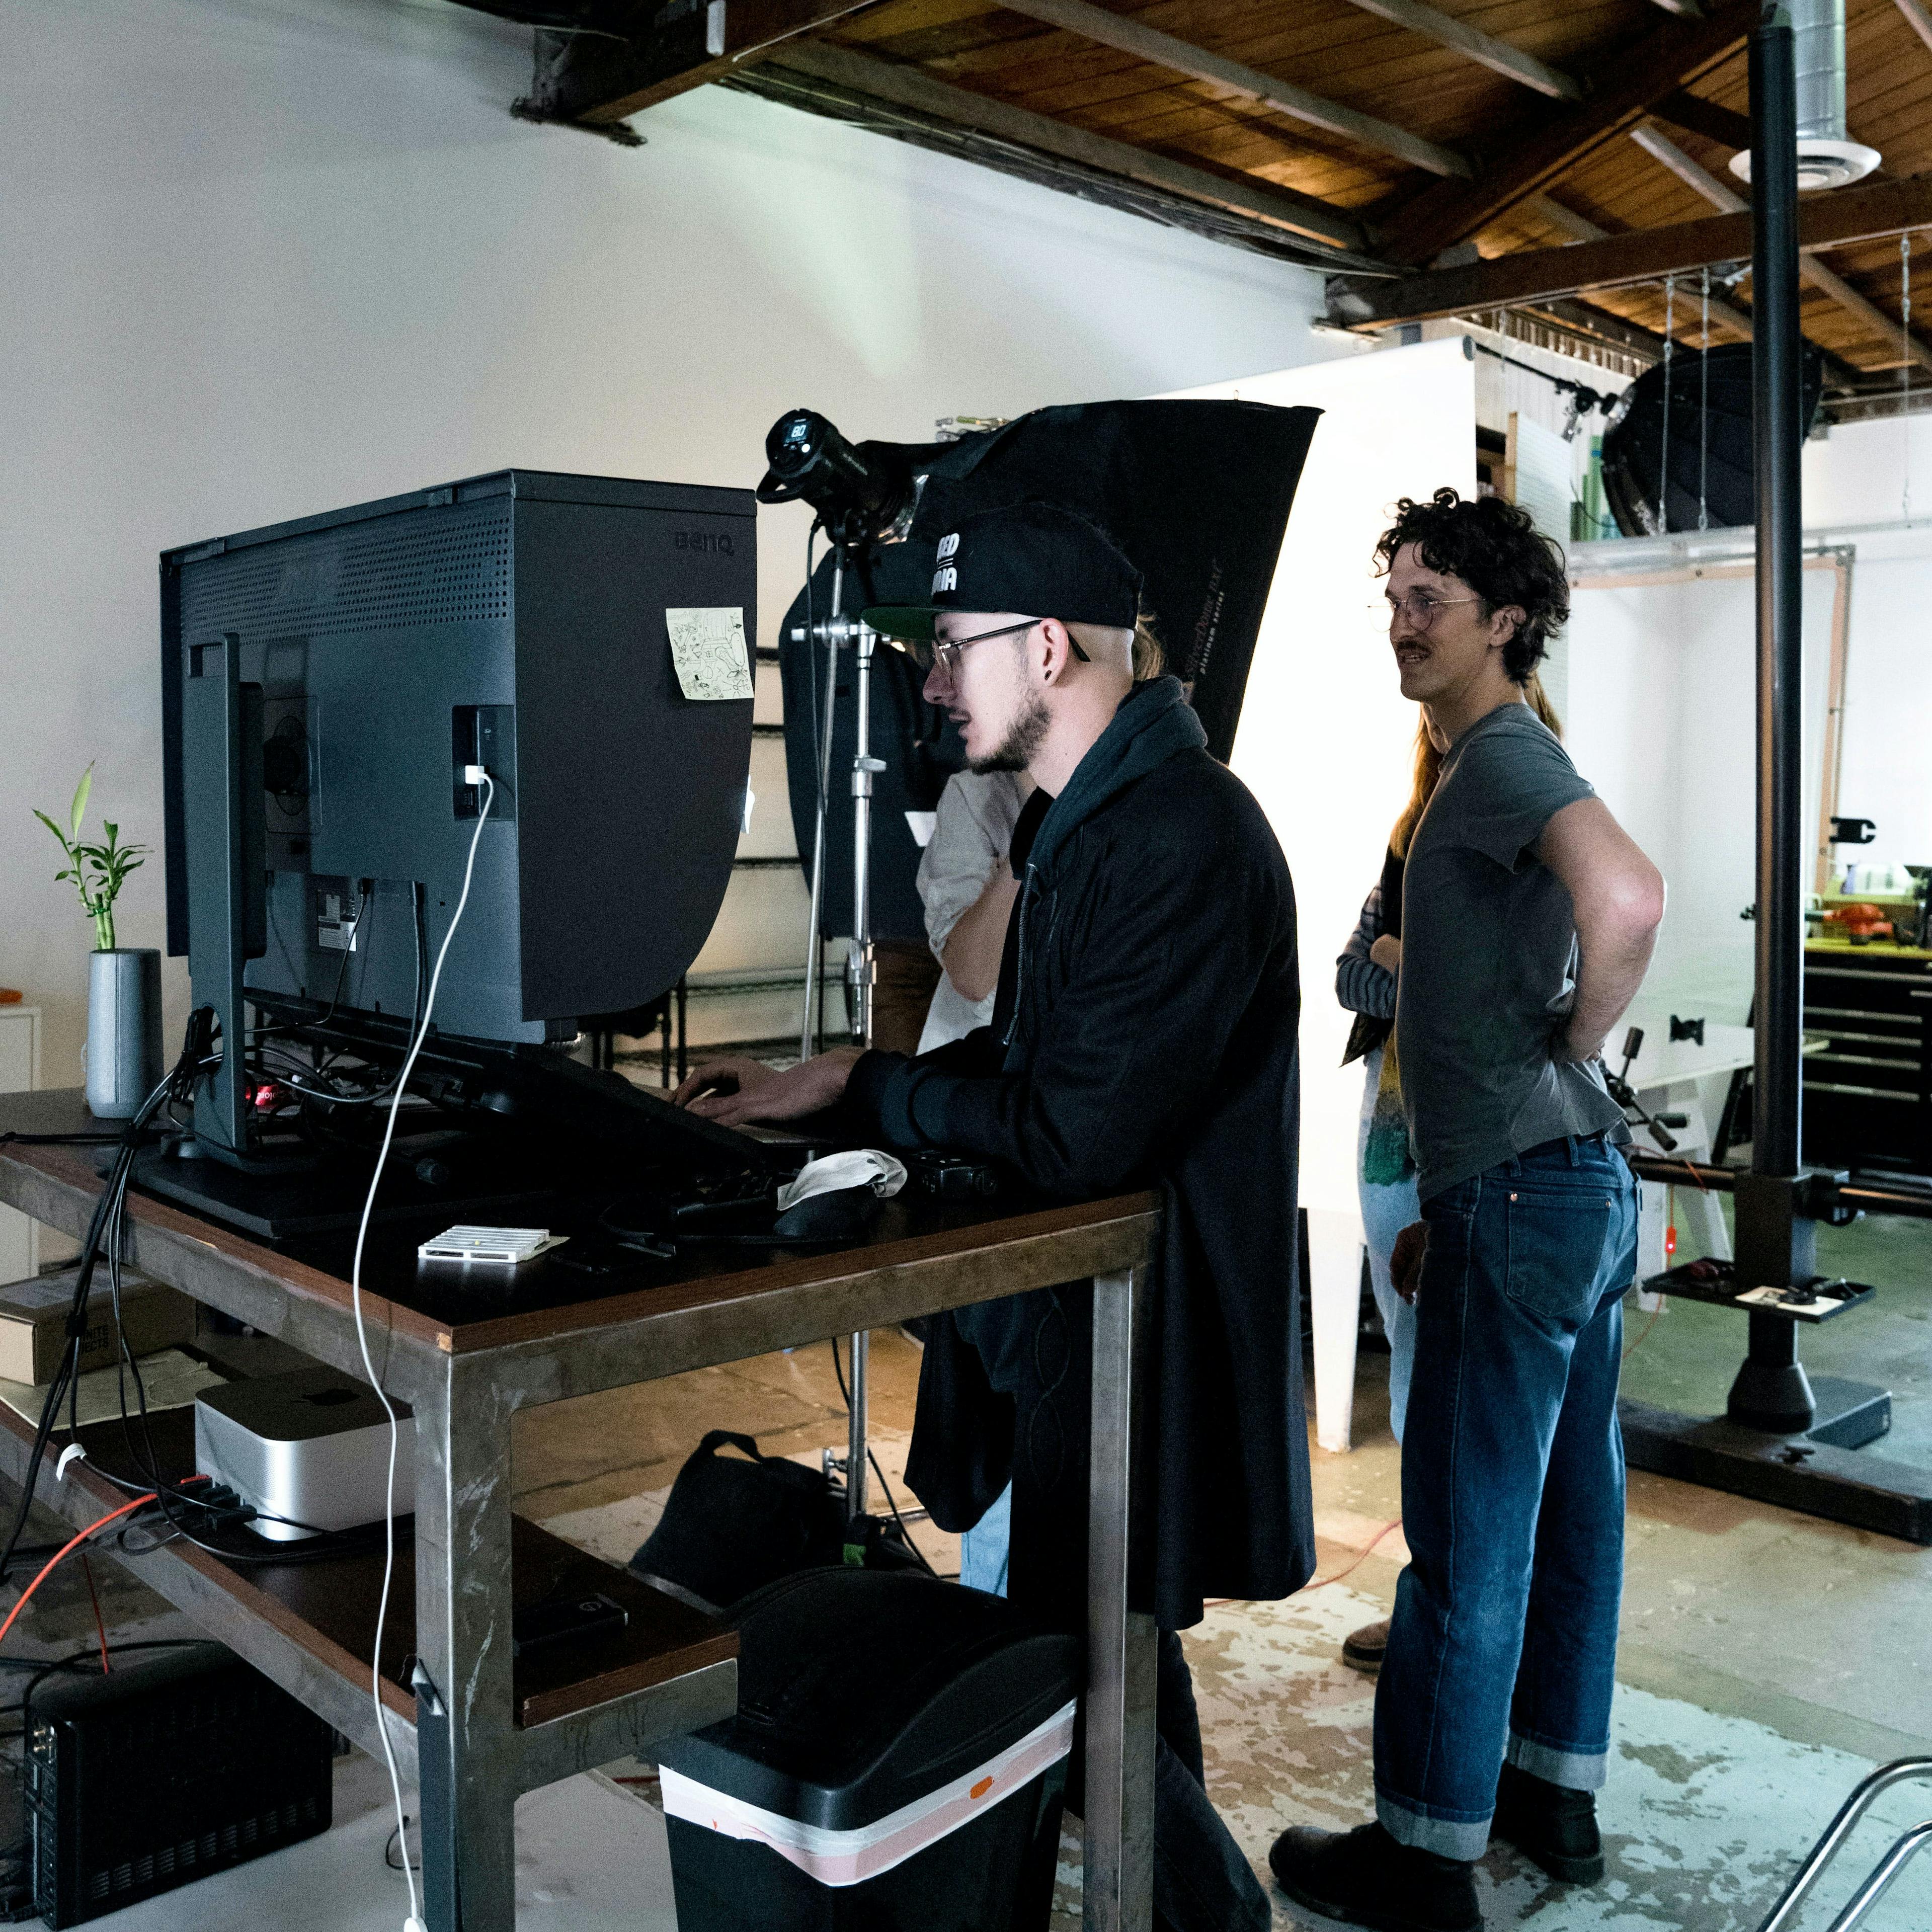 Photographer showing an image to a group of creative professionals standing around a computer, discussing the details of the shot